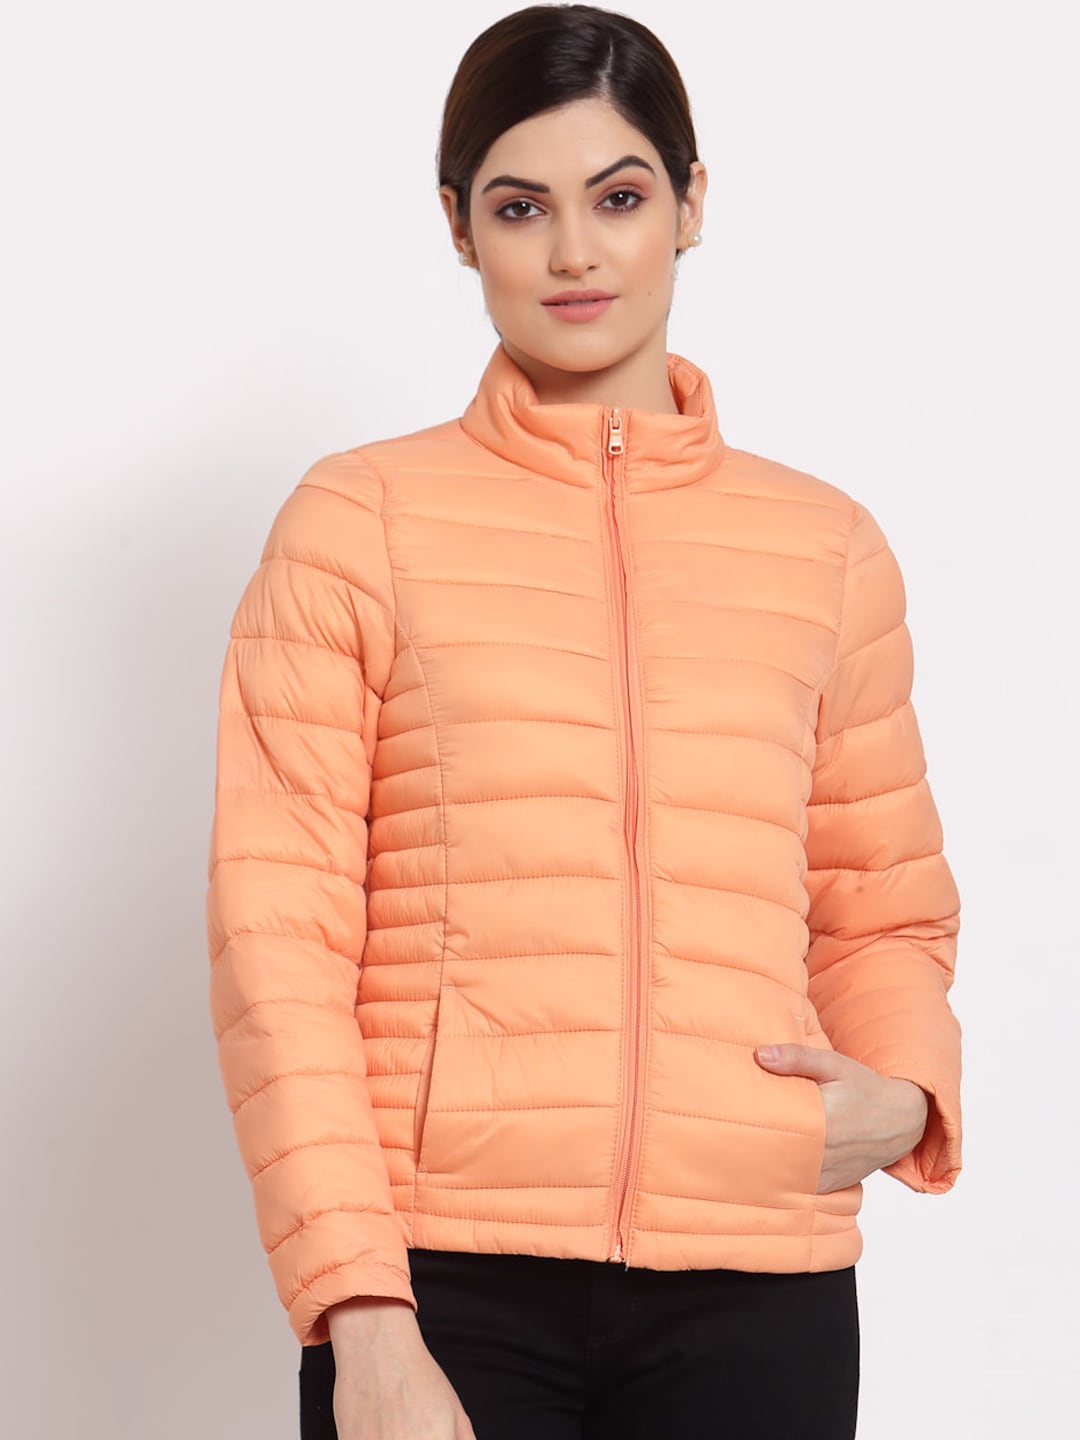 Mode by Red Tape Women Peach-Coloured Padded Jacket Price in India